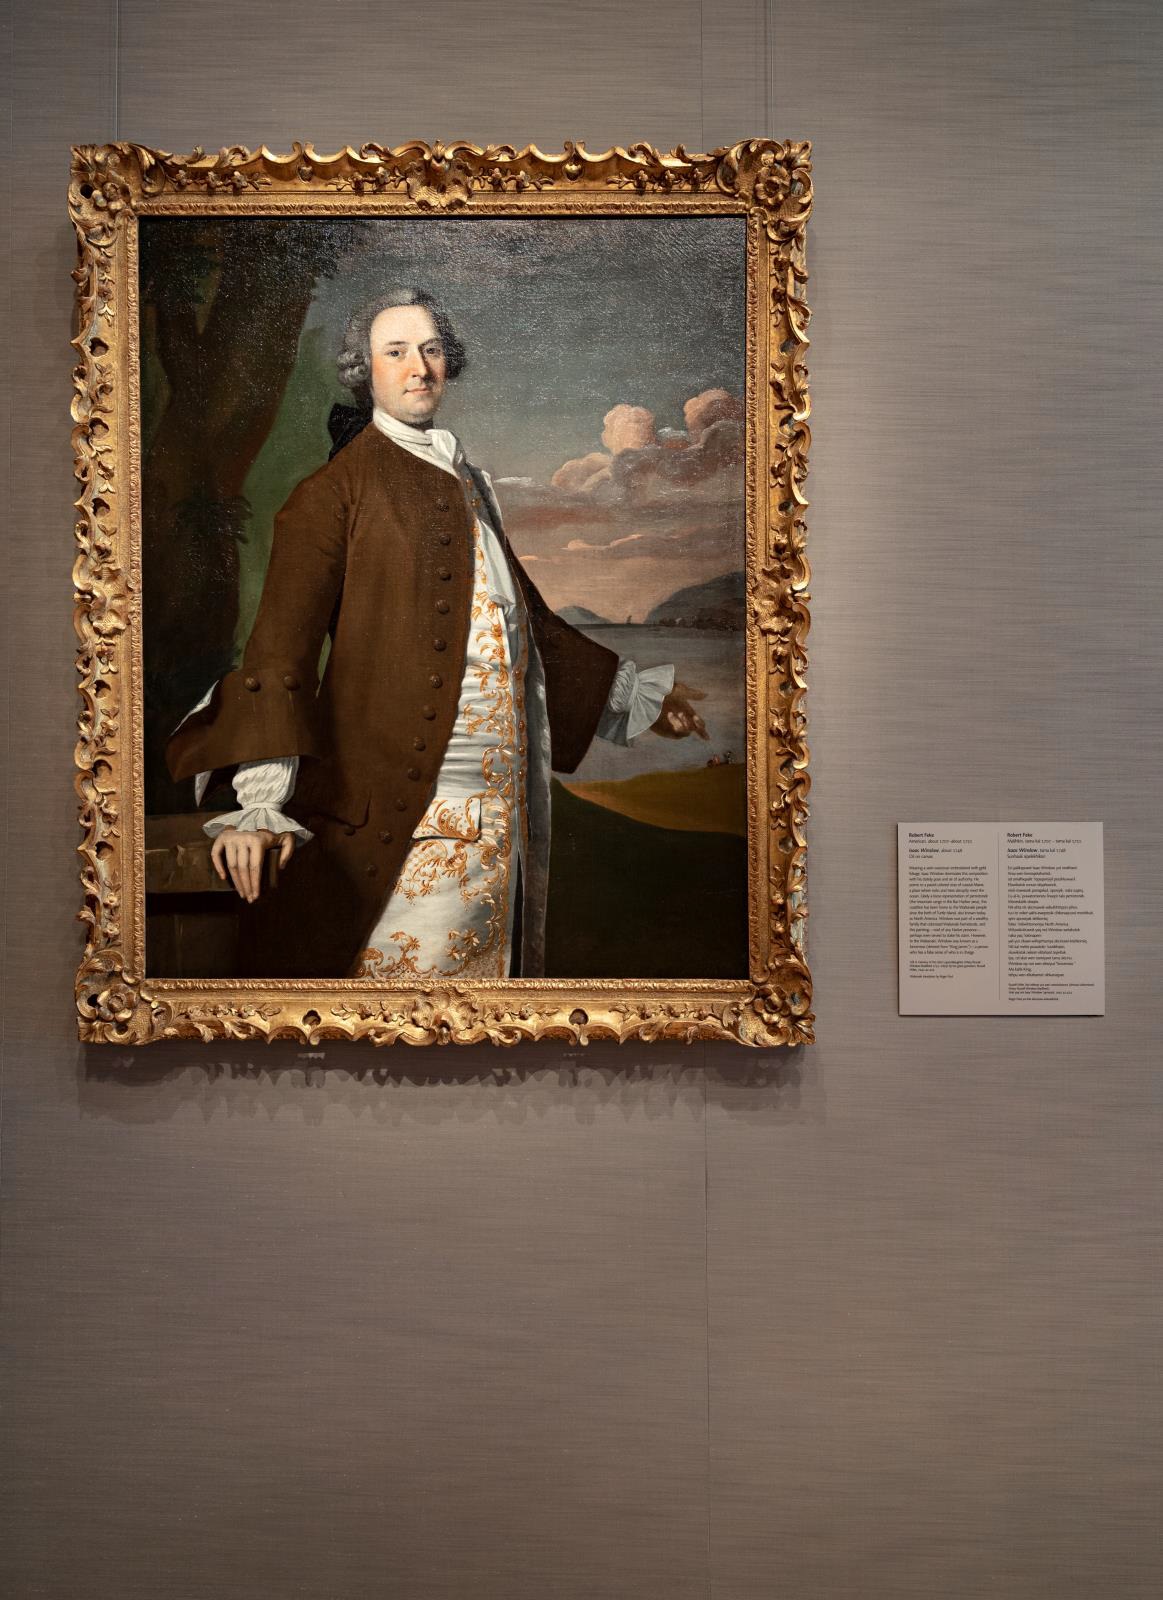 Framed painting of a man in 18th-century clothing hung on the wall of a museum, with an object label printed in two columns to its right